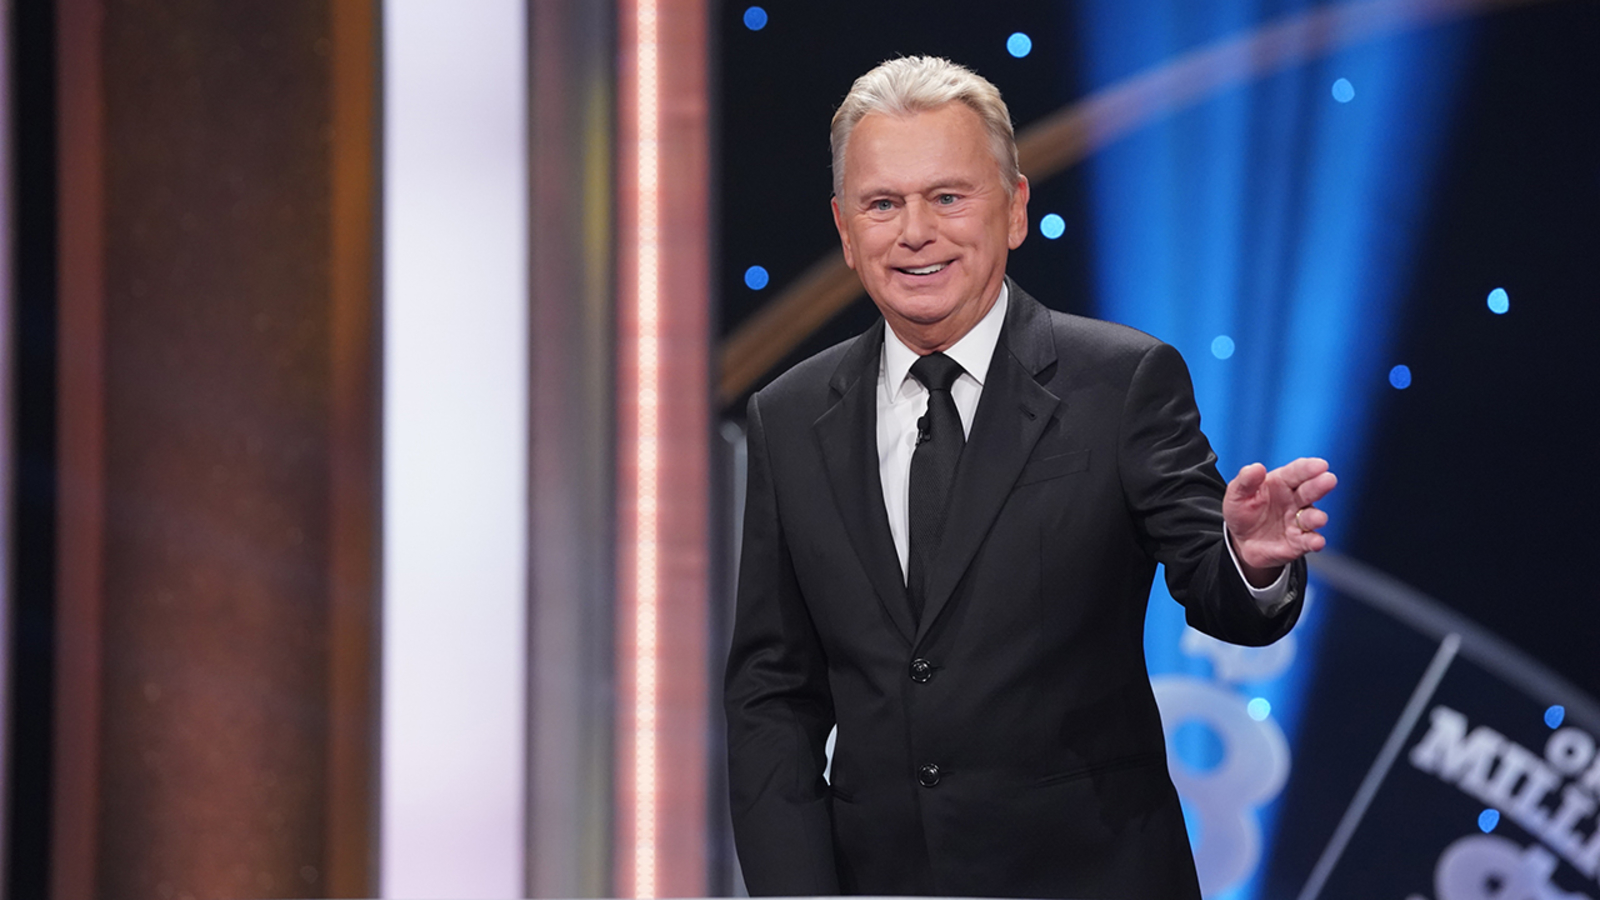 Pat Sajak to retire from ‘Wheel of Fortune’ after next season